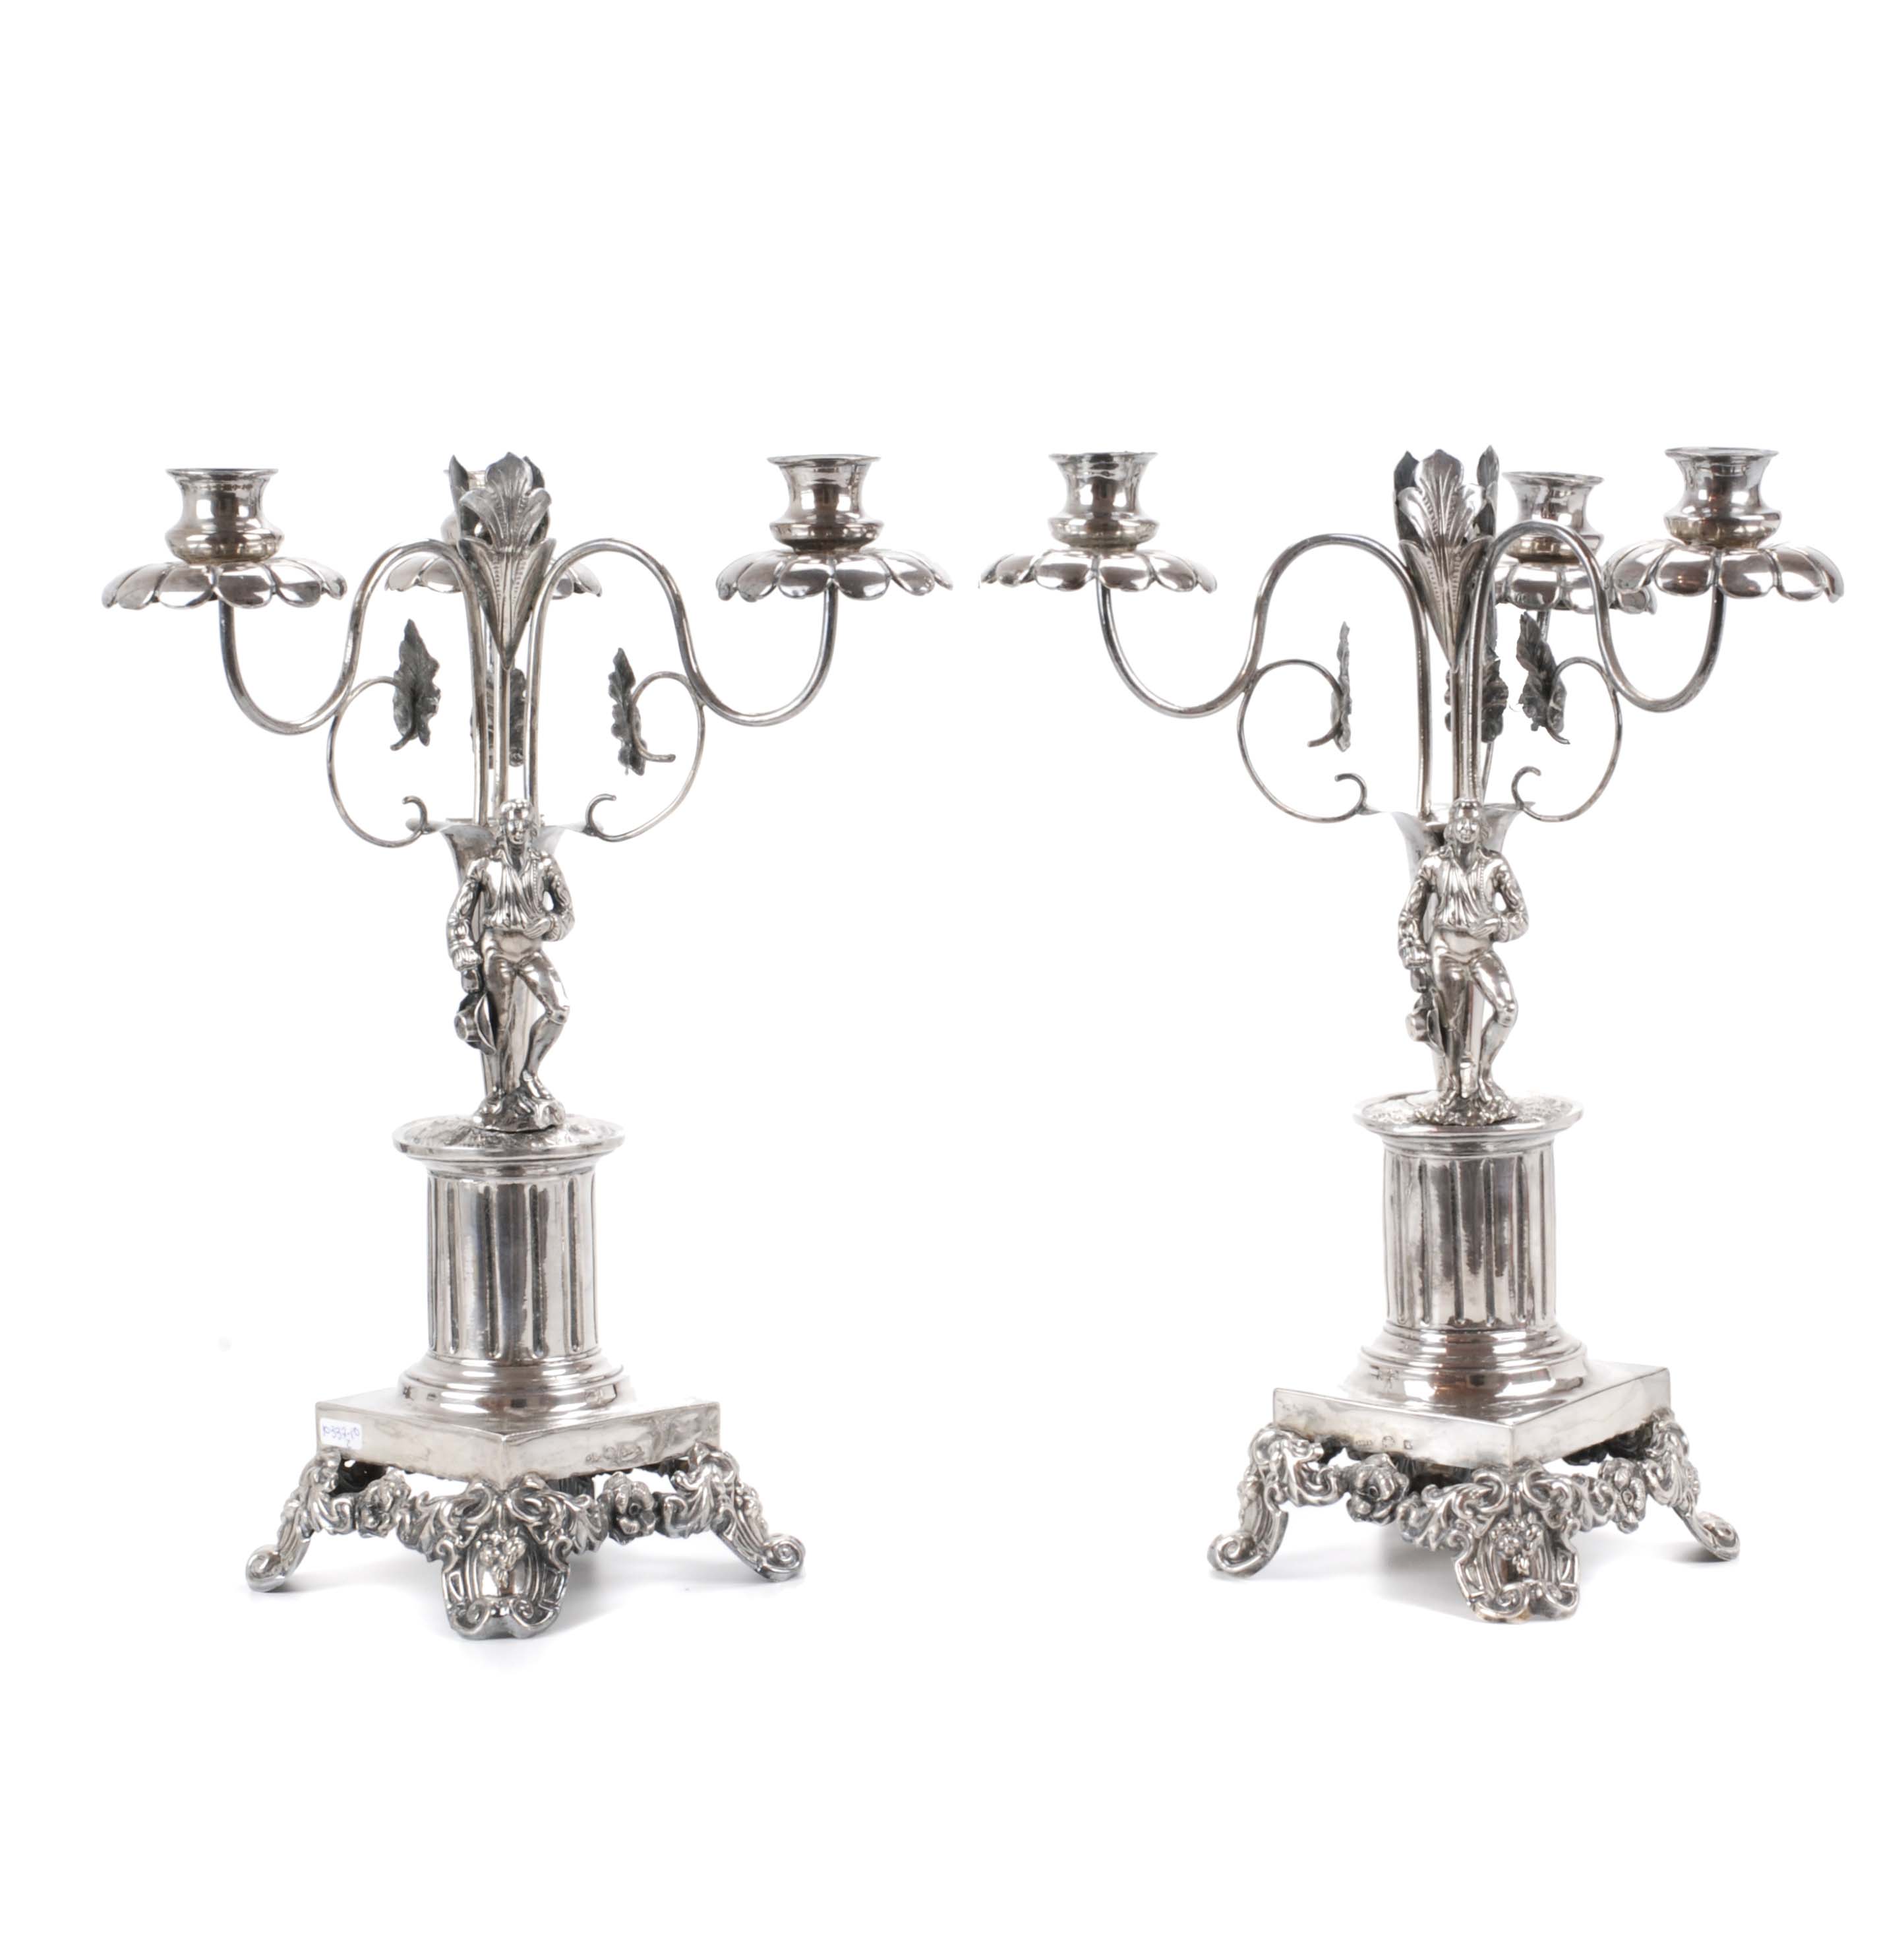 TWO SILVER CANDLESTICKS, BARCELONA, FIRST HALF OF THE 19TH